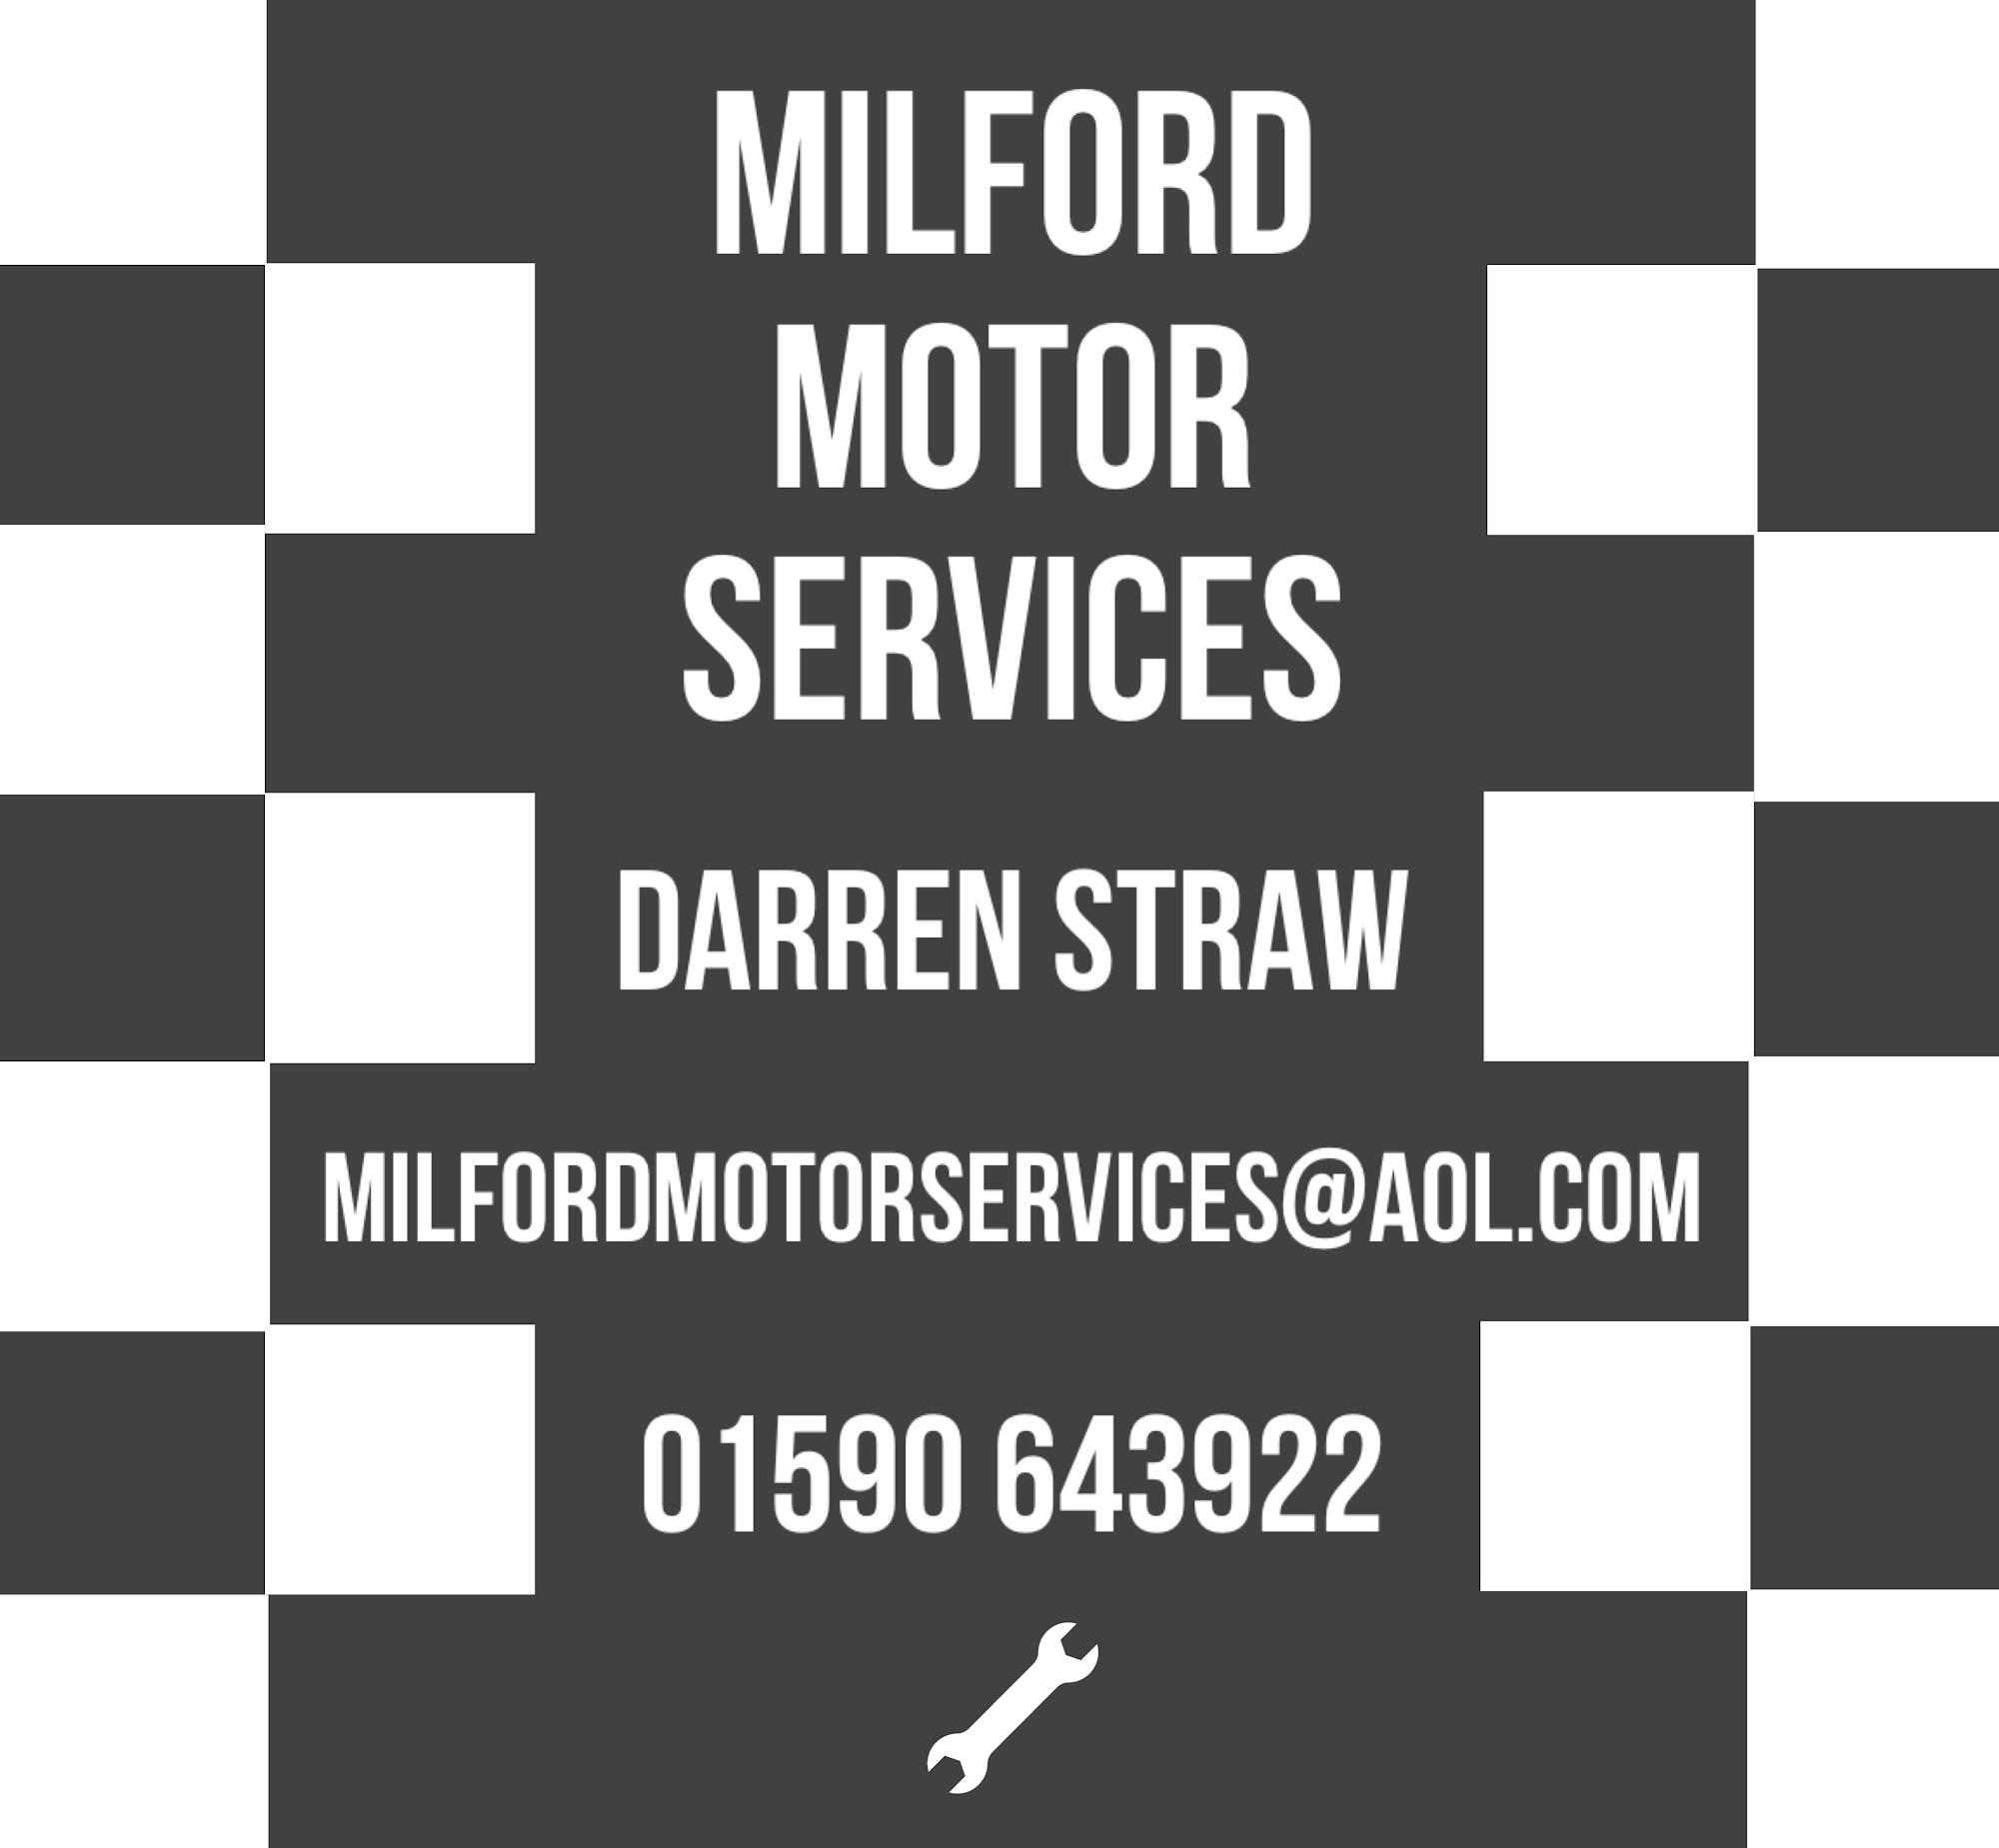 Milford Motor Services